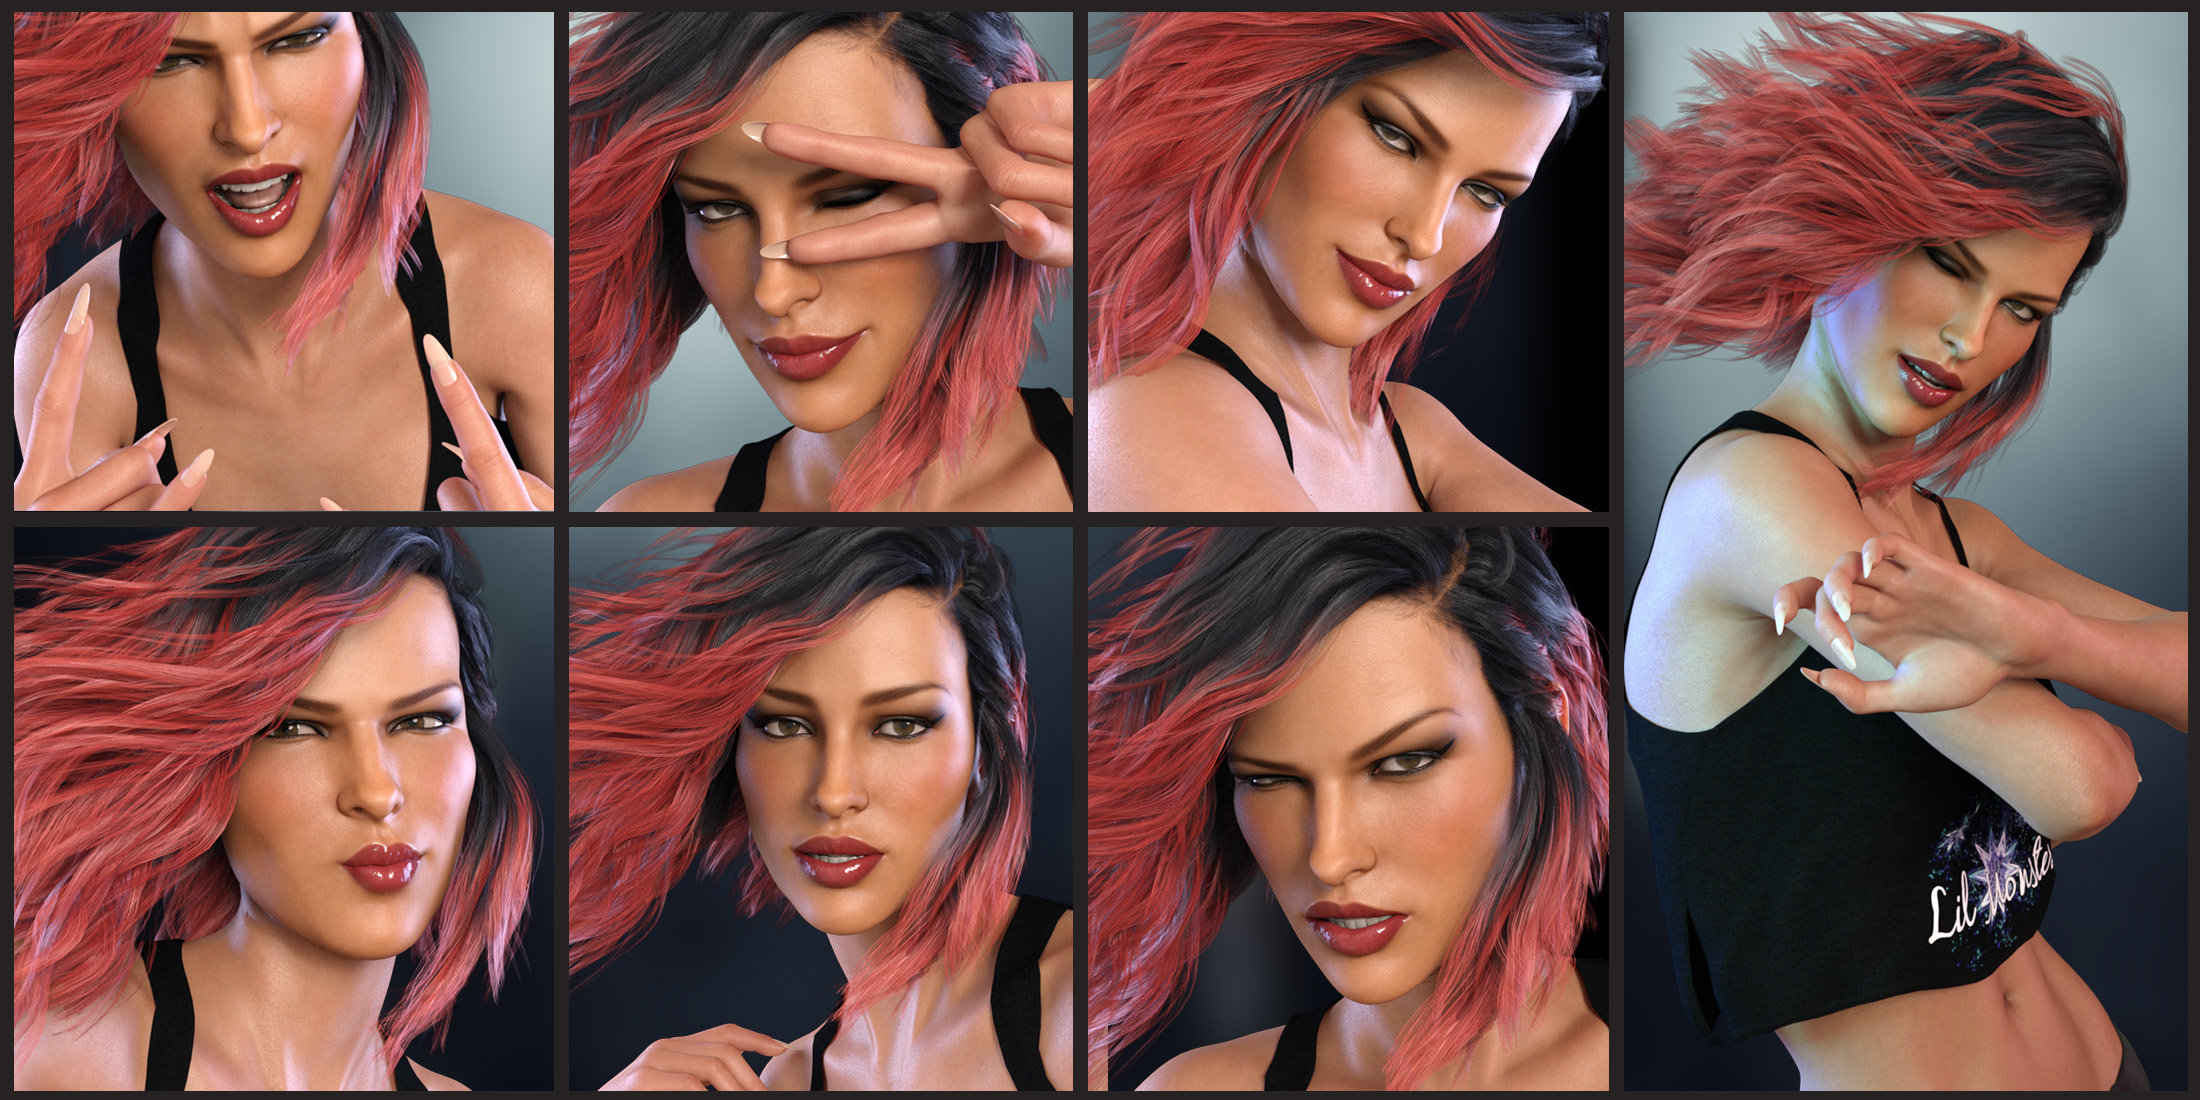 Z Daredevil - Dialable and One-Click Expressions for Genesis 8 Female(s) by: Zeddicuss, 3D Models by Daz 3D